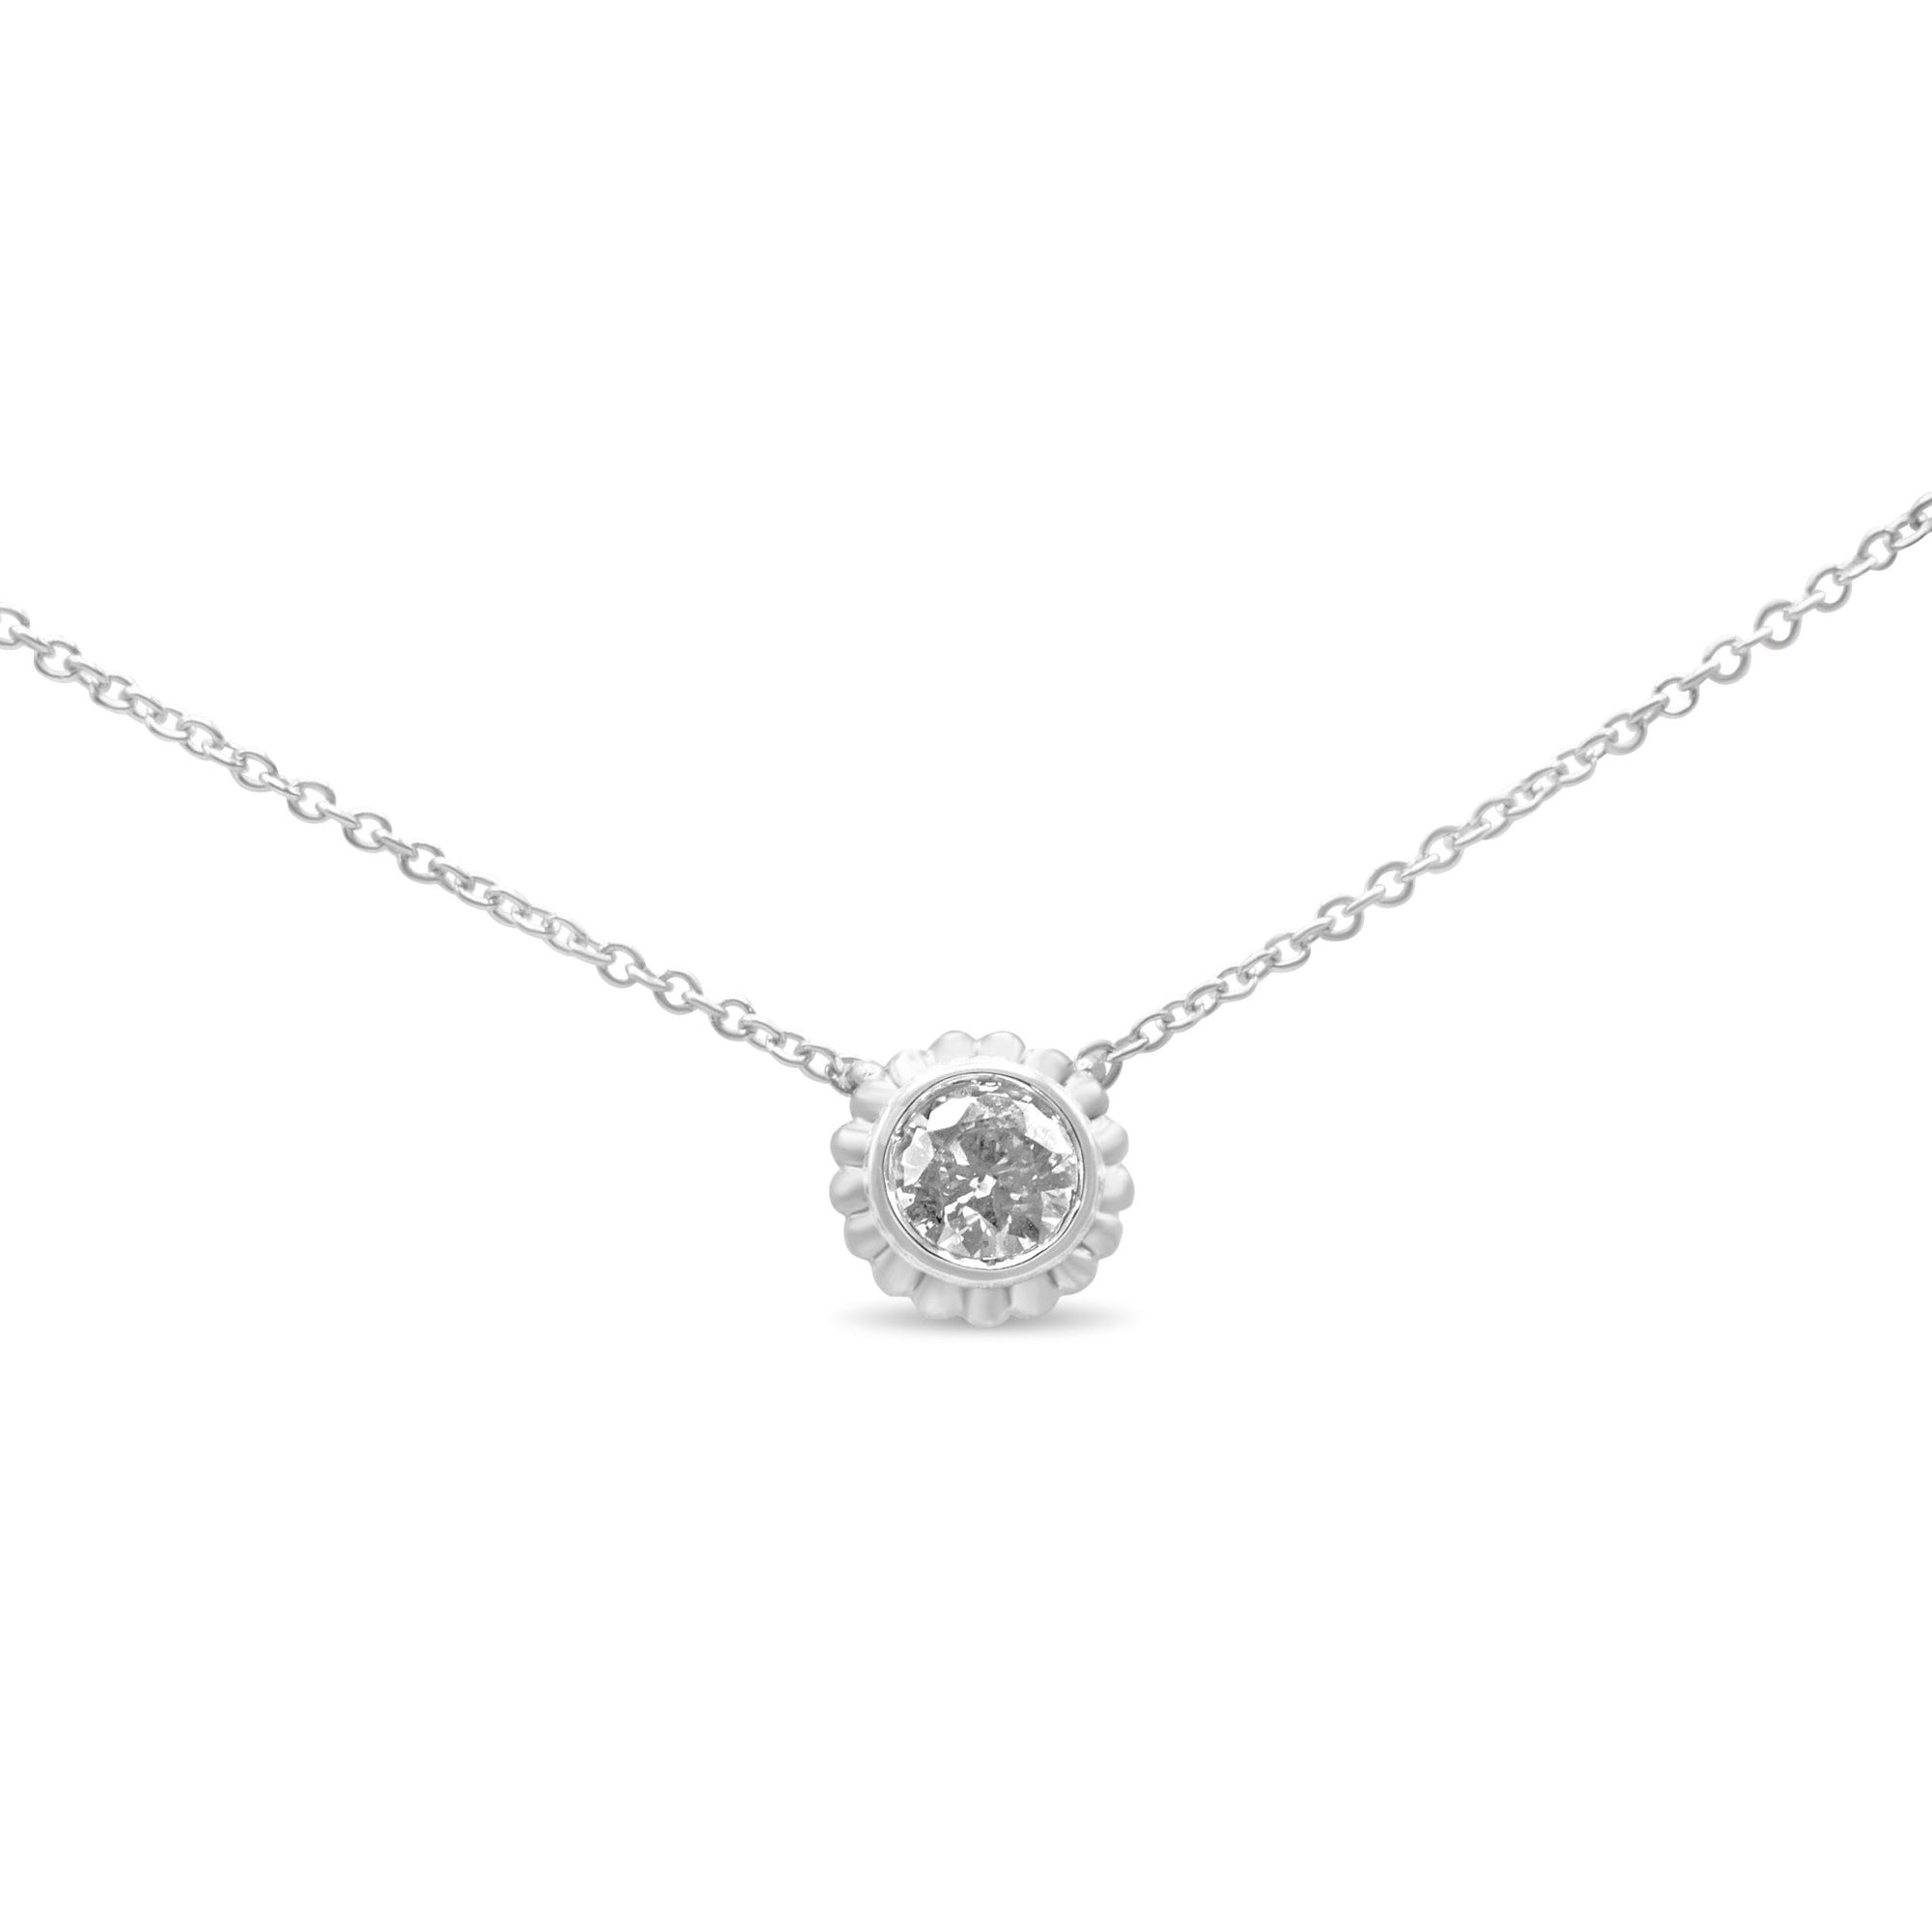 10K White Gold 1/4 Cttw Bezel-Set Round Diamond Solitaire Floral Pendant 18" Necklace (I-J Color, SI2-I1 Clarity) - LinkagejewelrydesignLinkagejewelrydesign